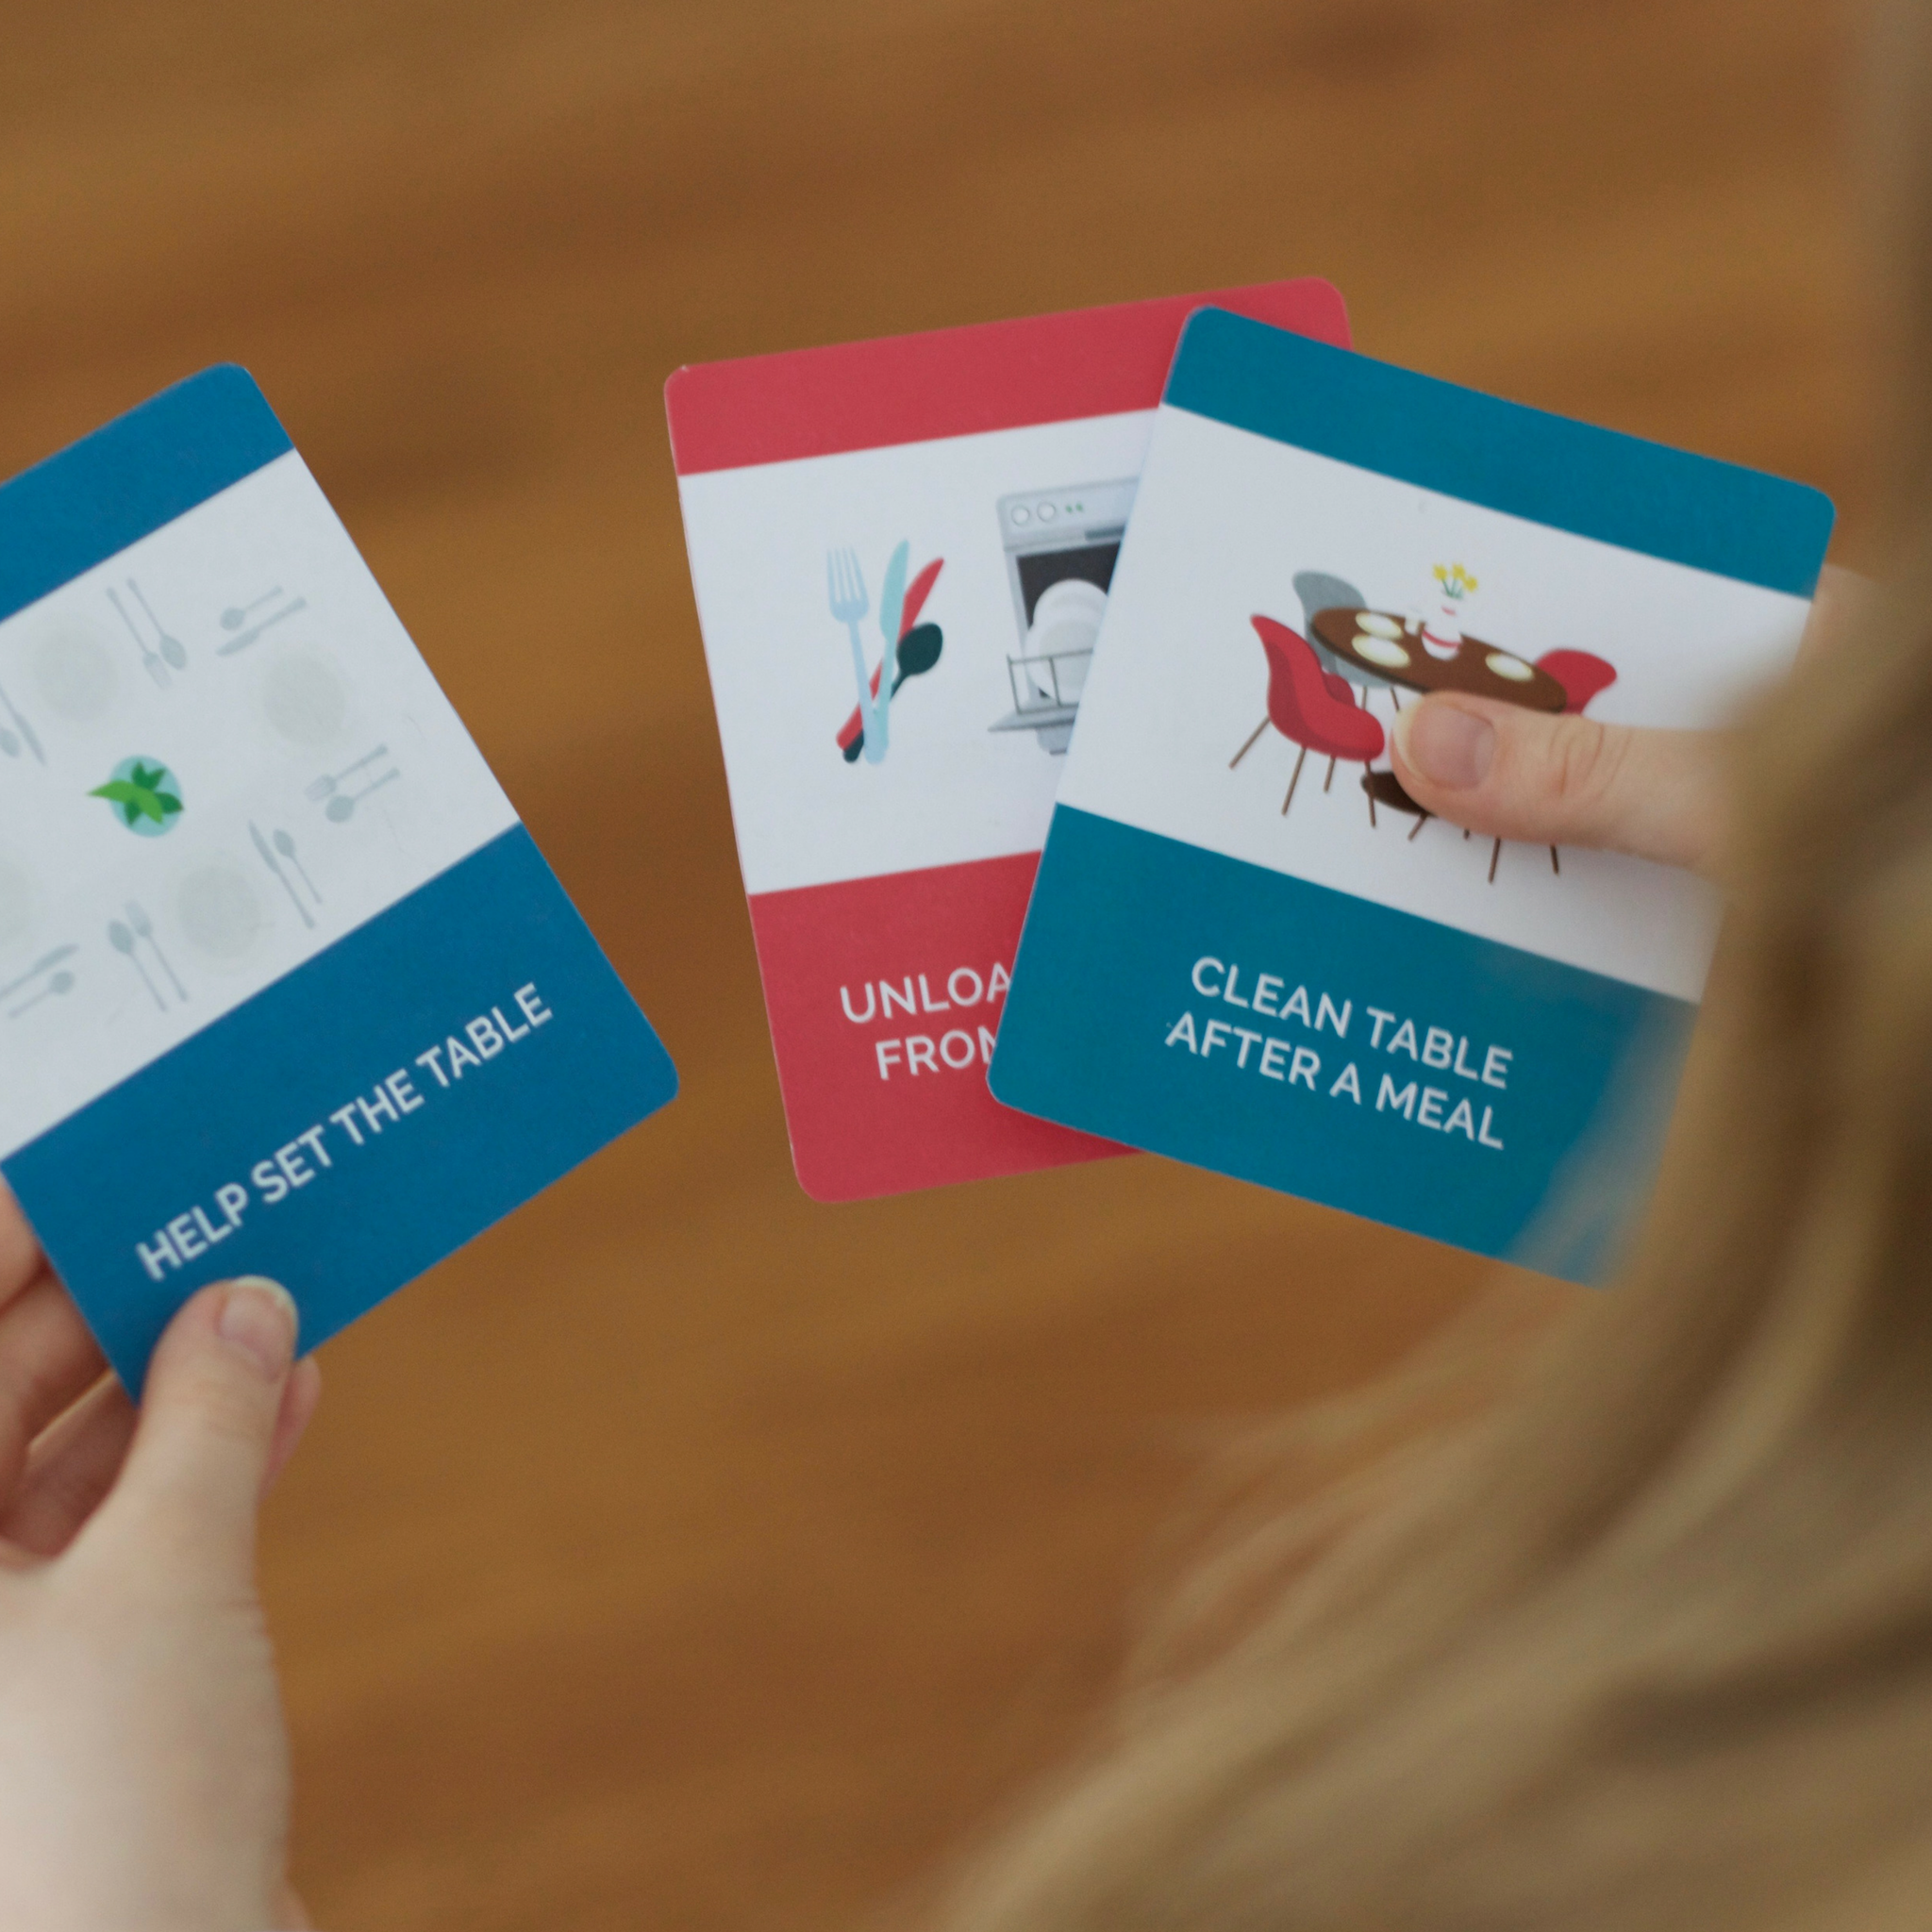 Chore Cards for Kids – Limited Time Offer 50% Off